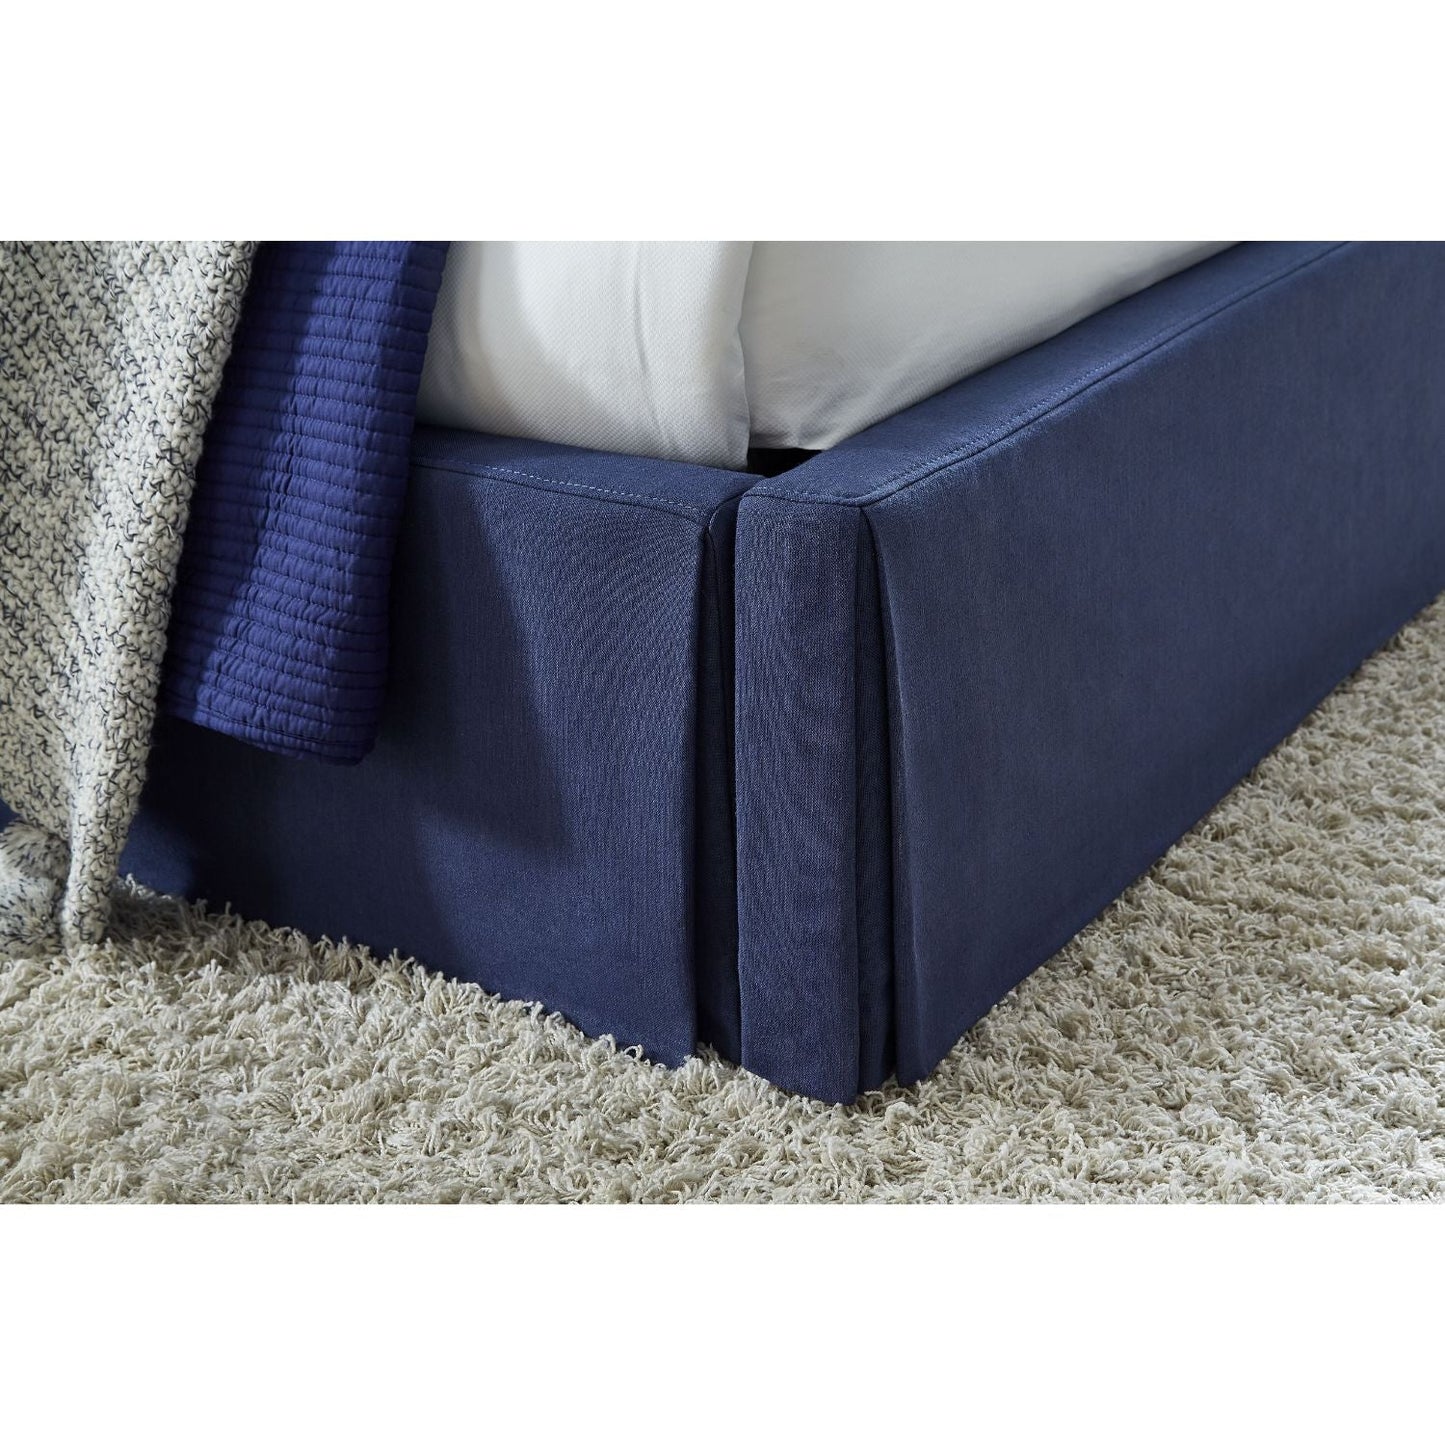 Modus Sur King Upholstered Skirted Storage Panel Bed in Navy